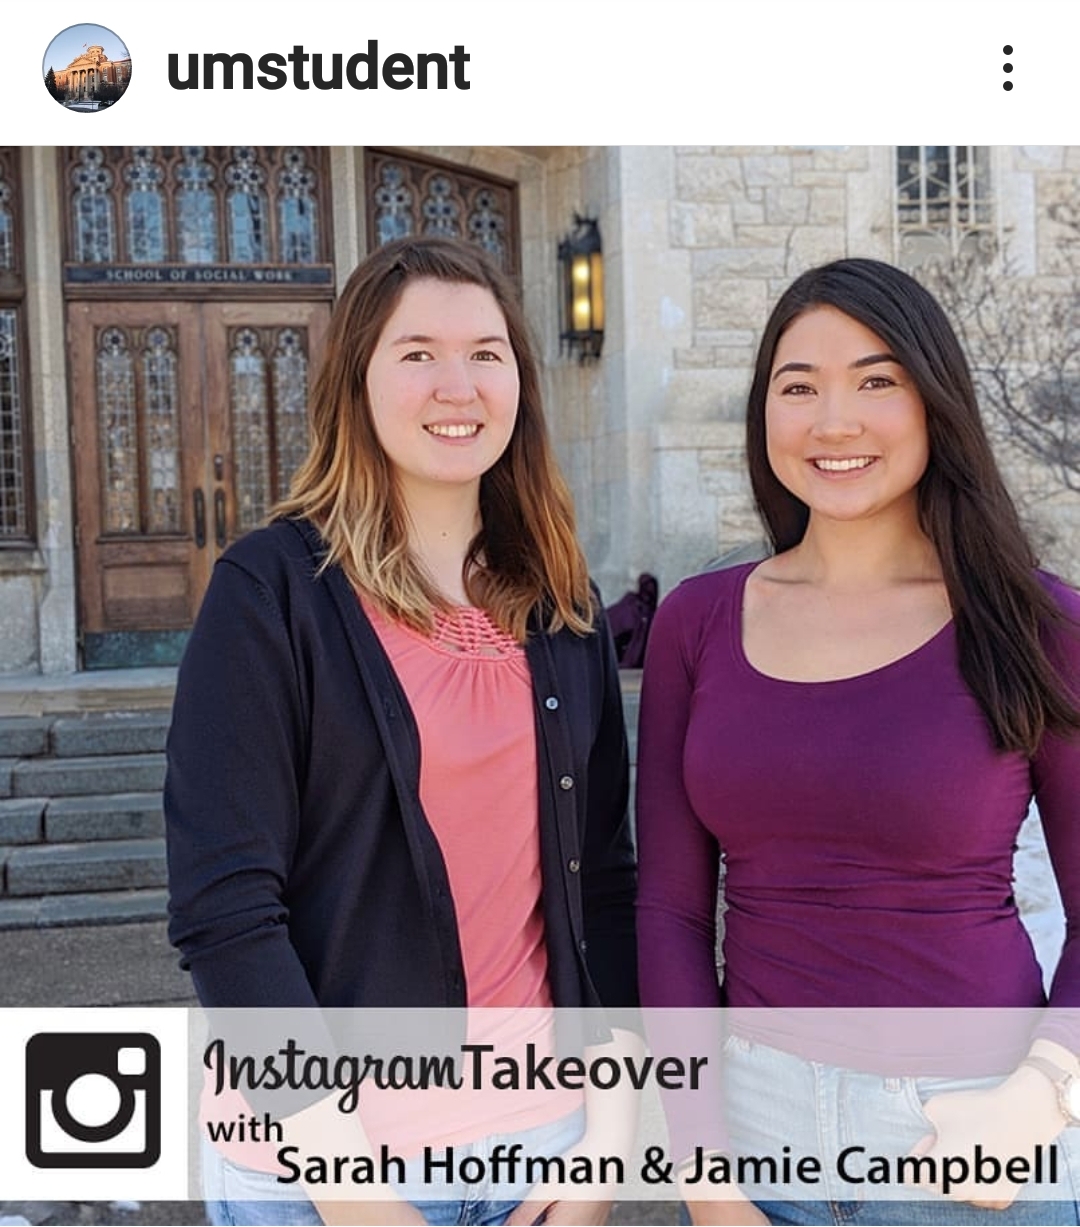 Sarah Hoffman & Jamie Campbell on their Instagram takeover of the umstudent account